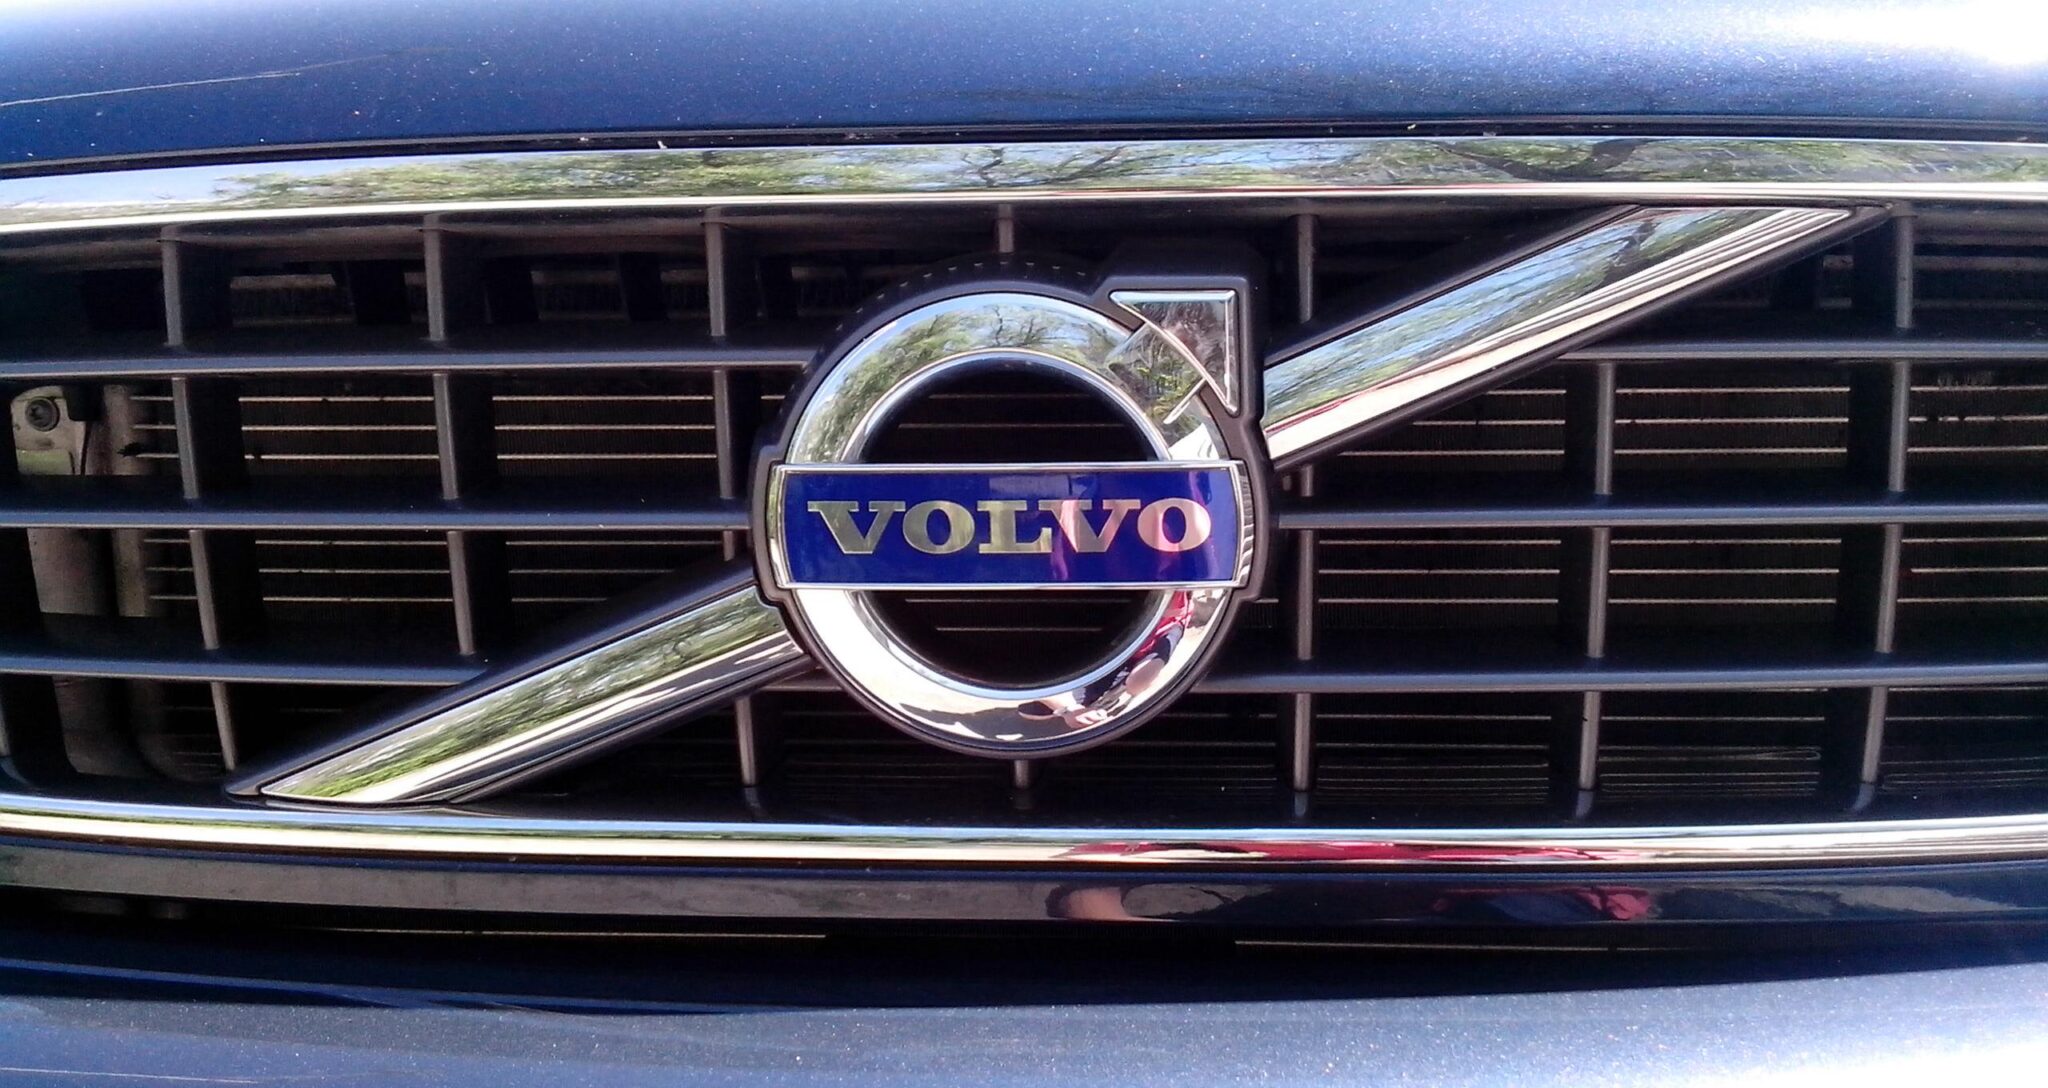 Wireless charging for electric cars – Volvo is testing the technology